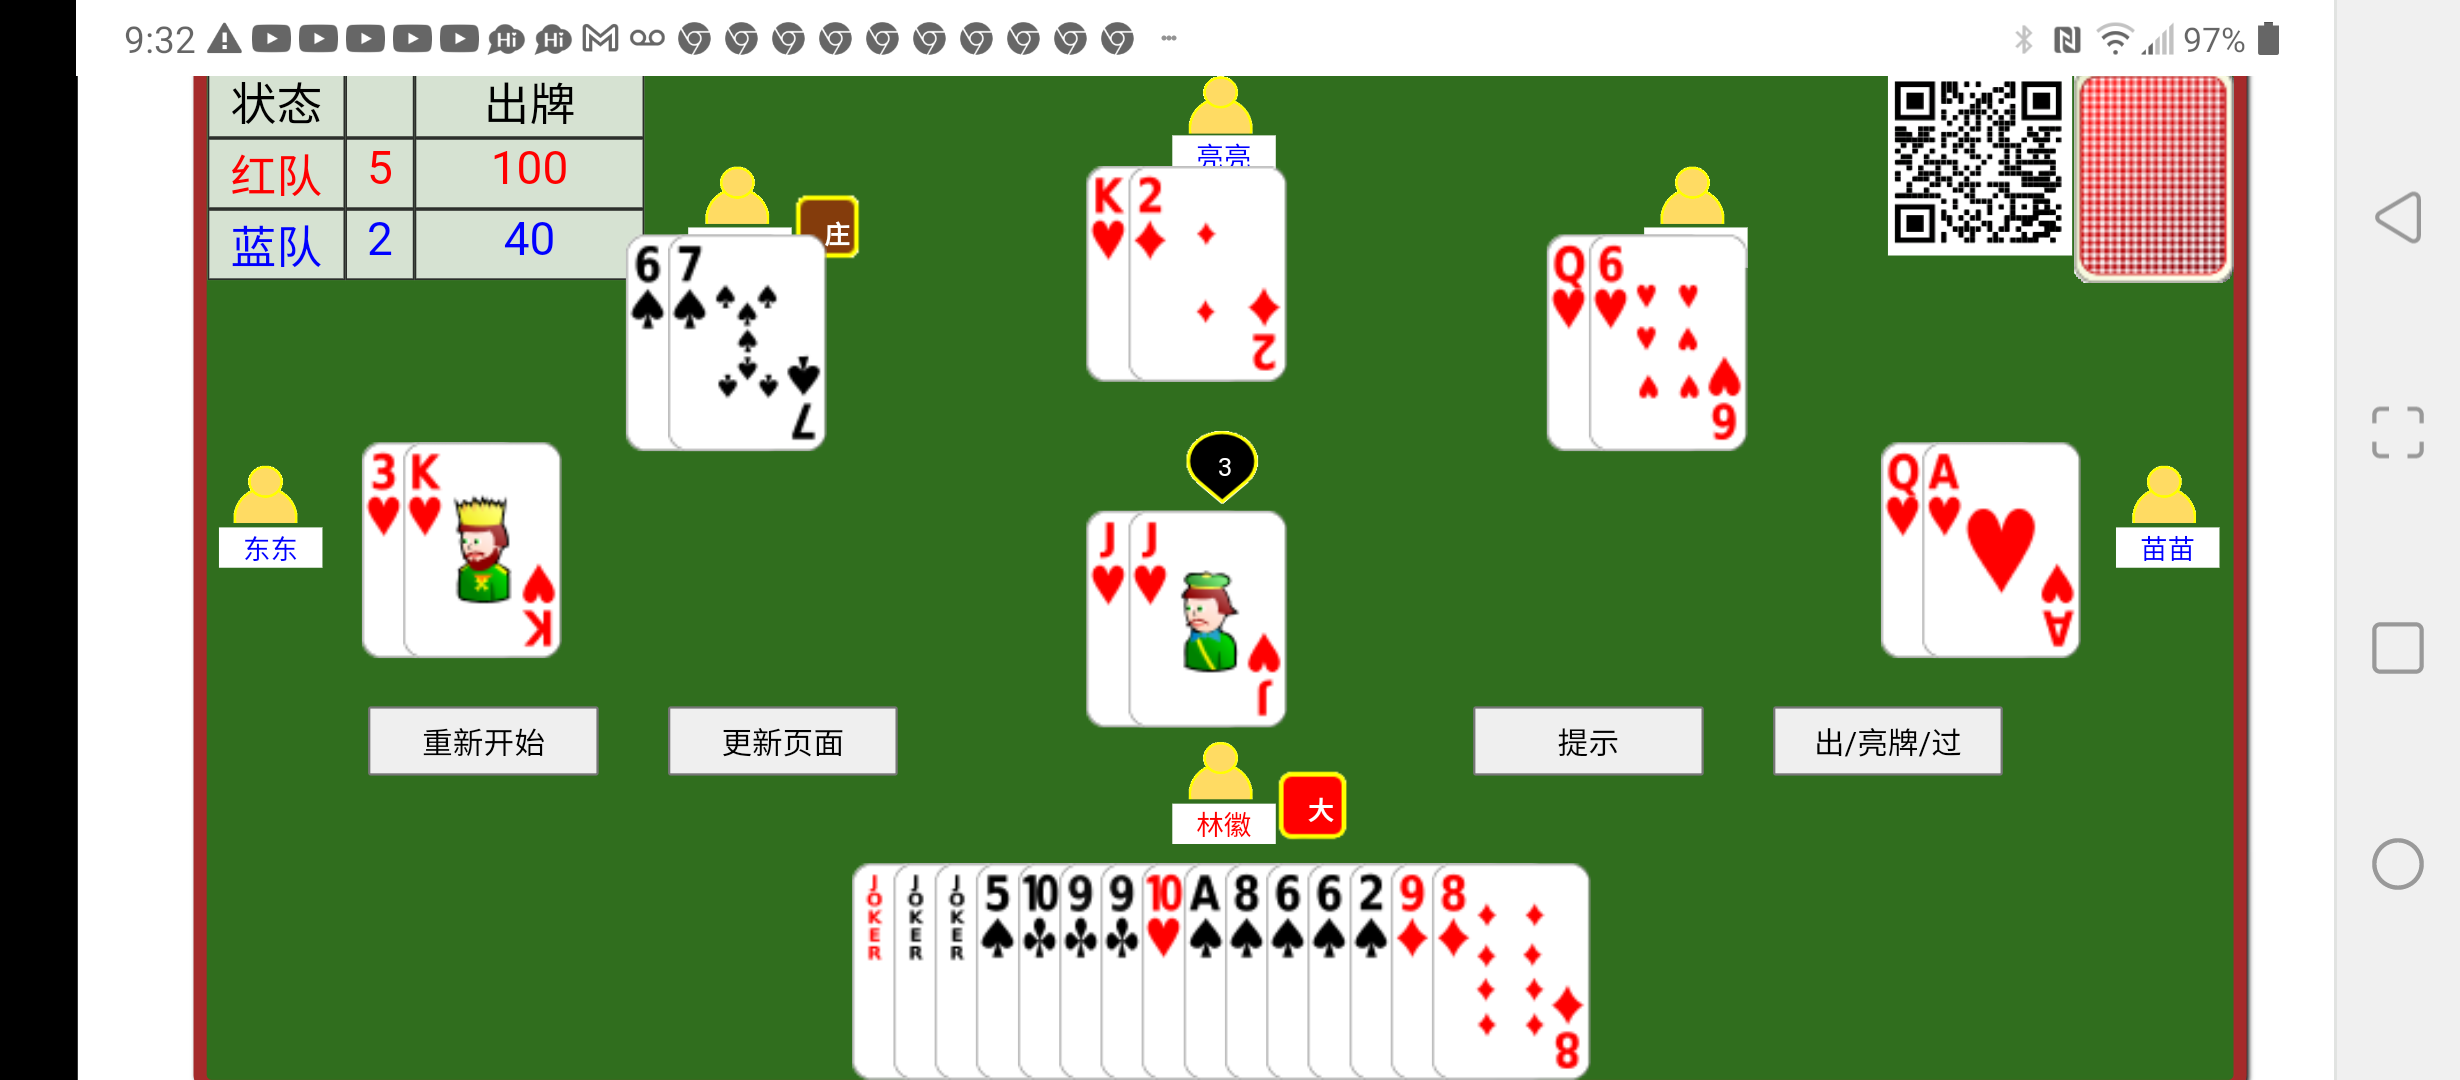 html5 tractor card game Screenshot_20220116-093231.png